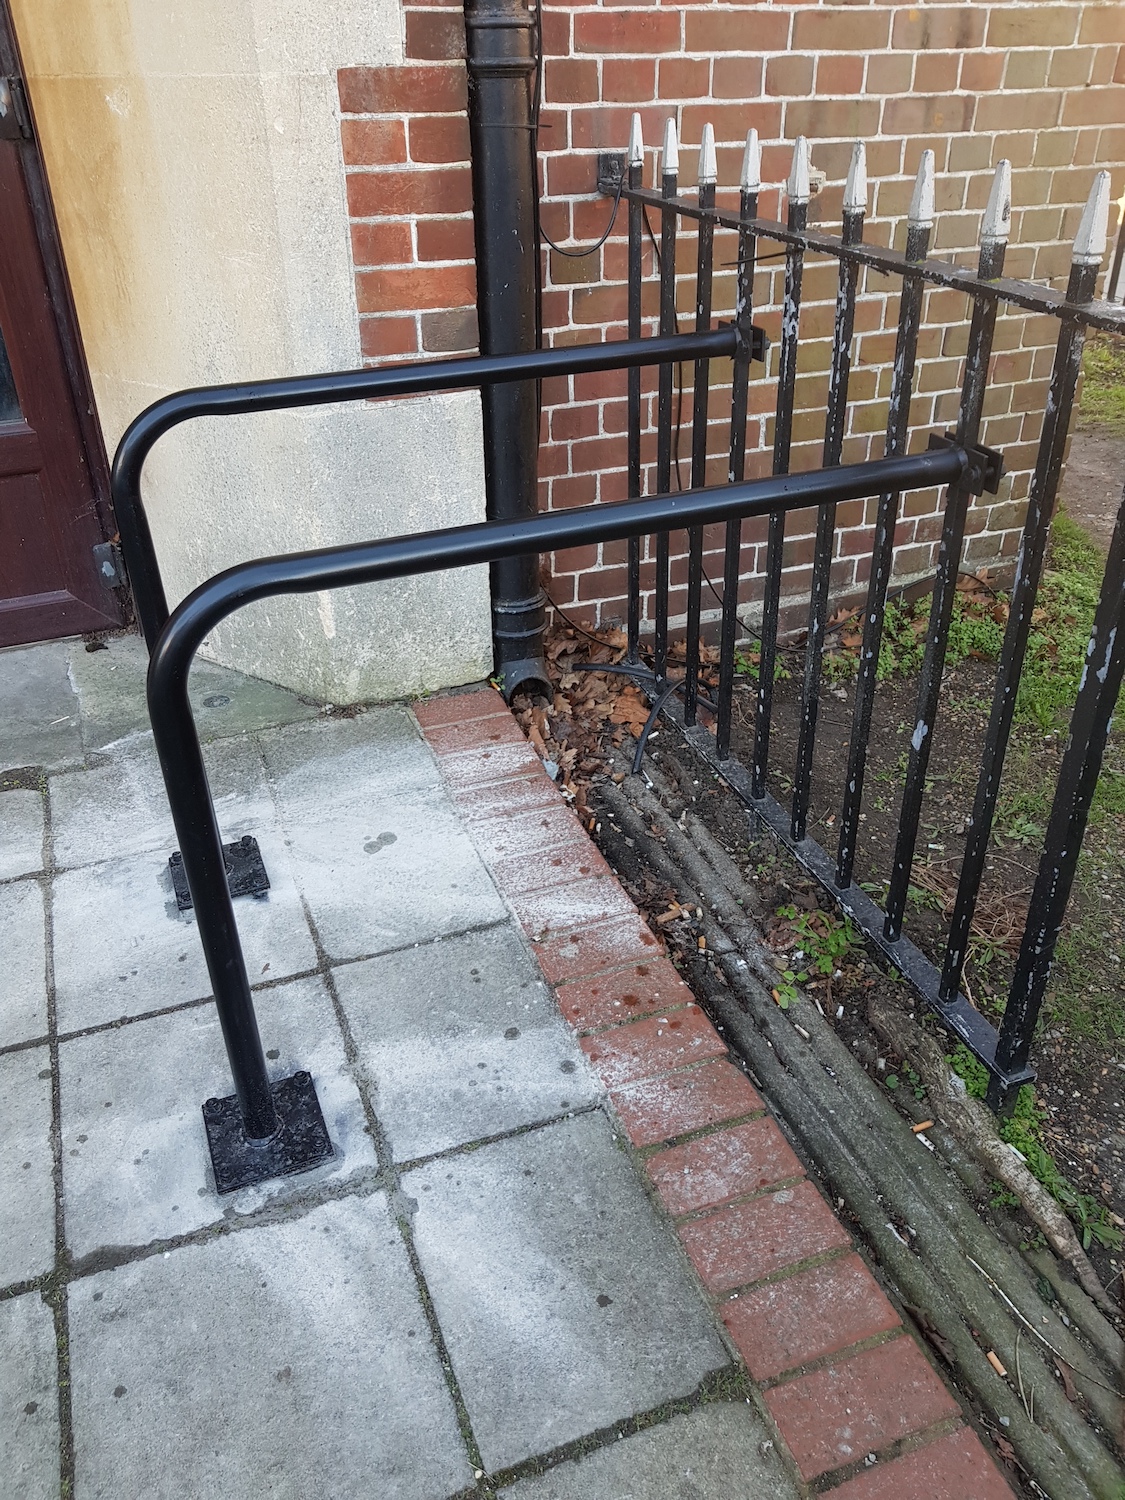 Bespoke cycle stand fitting by Kestrel Cycle Stands